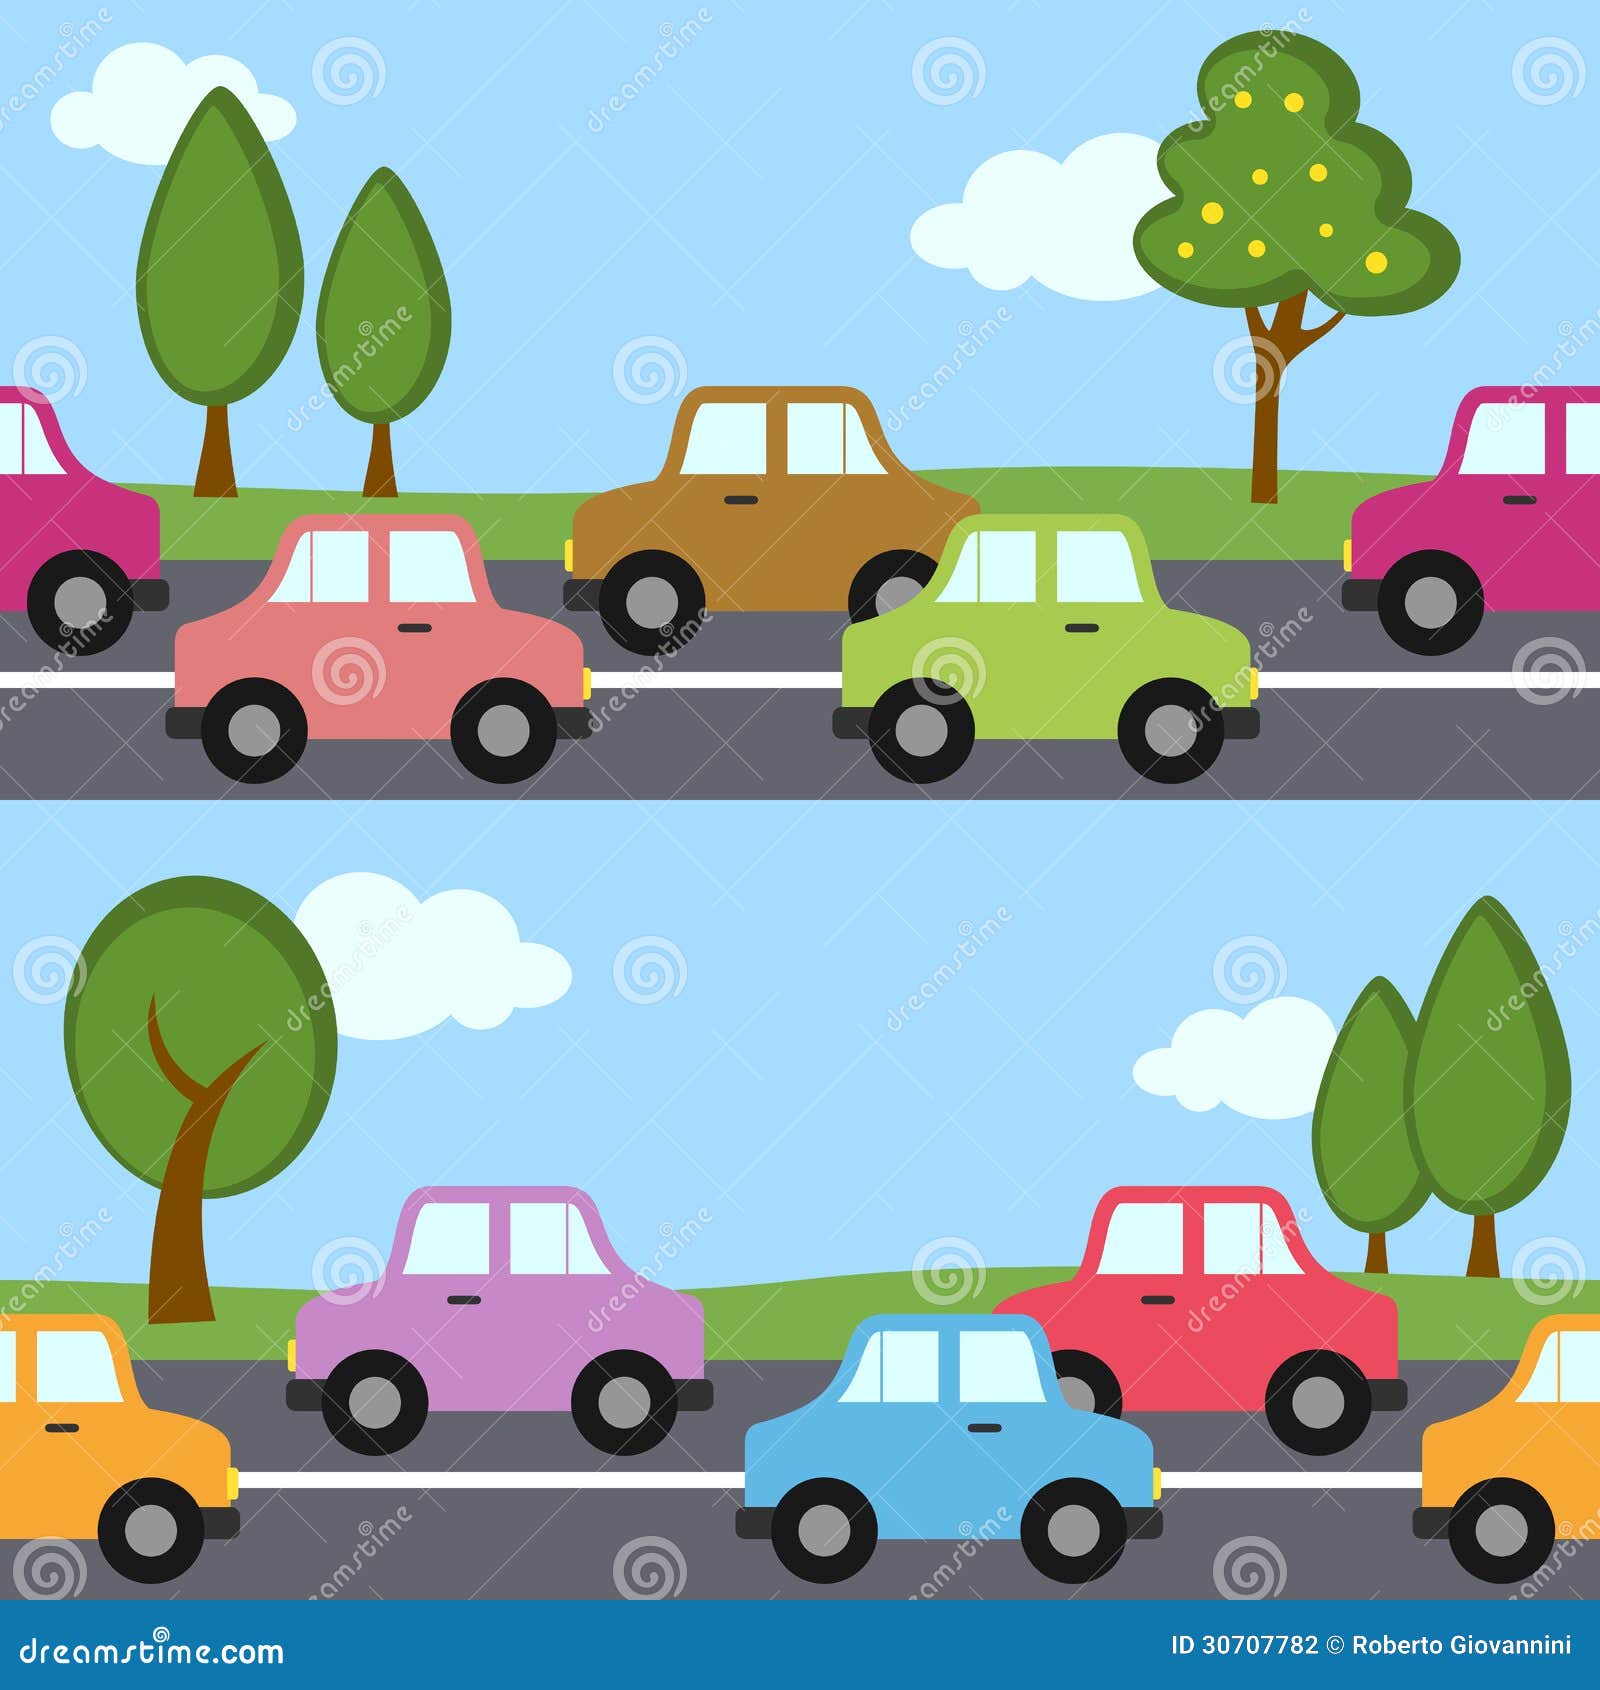 clipart car driving on road - photo #22